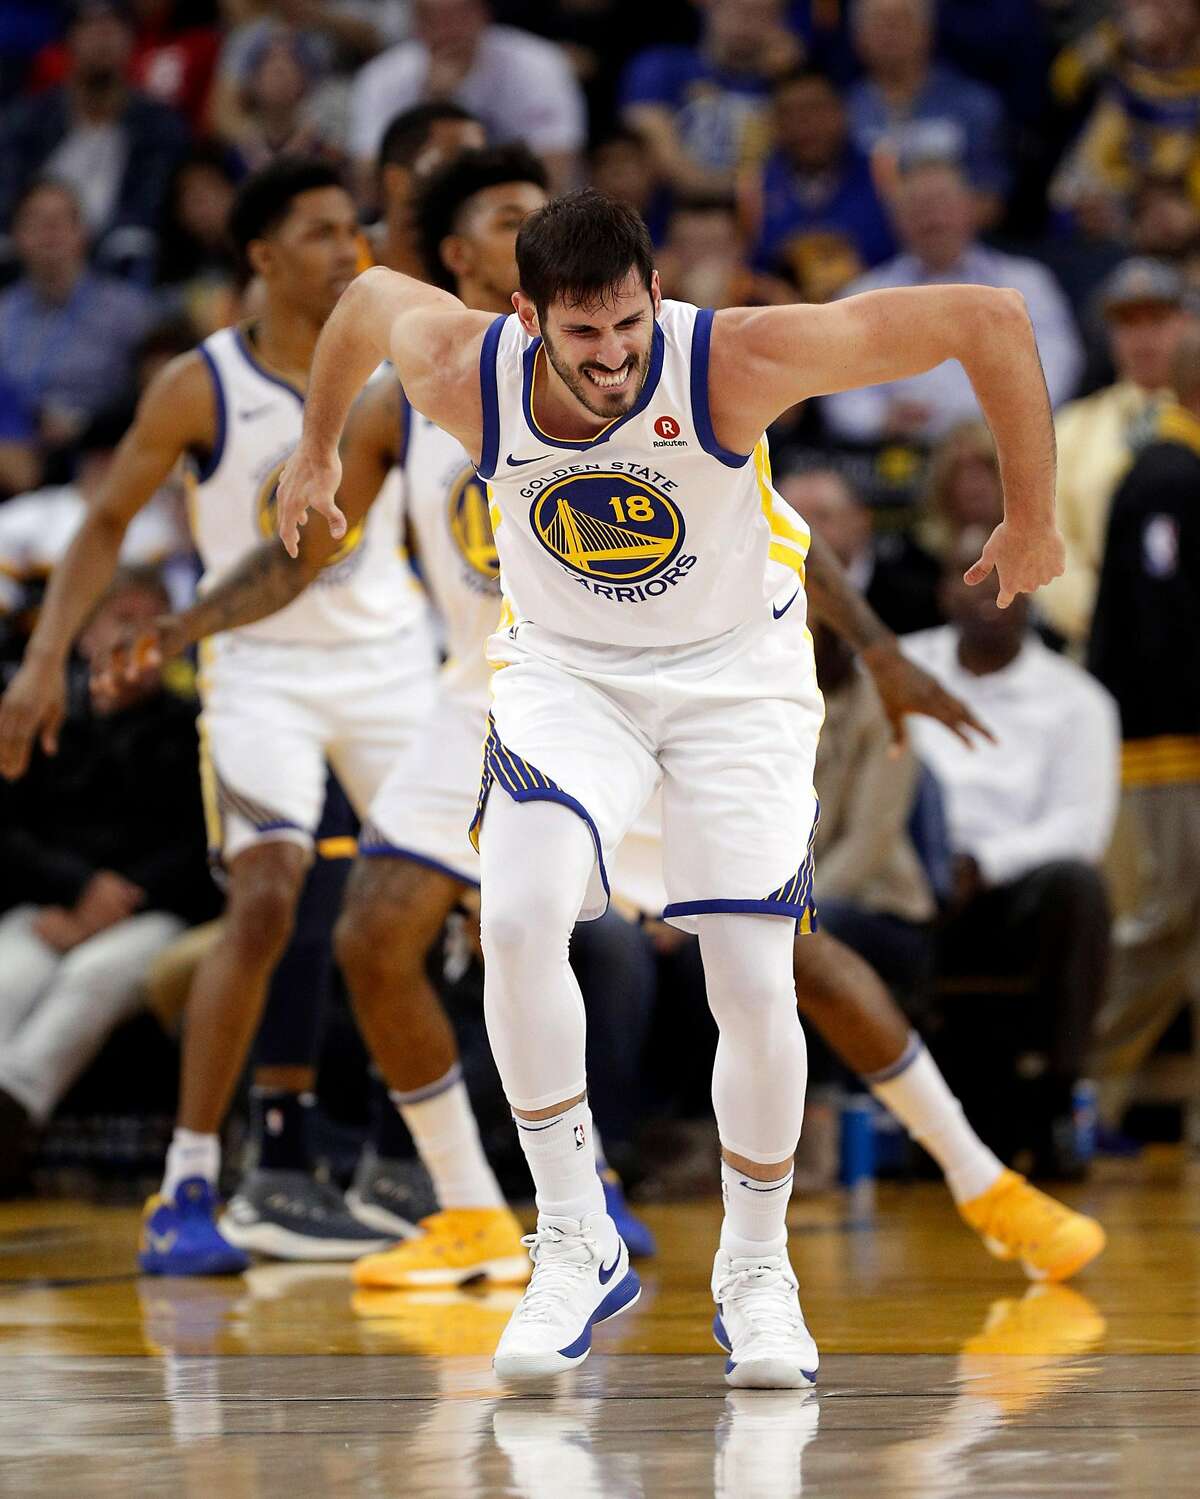 Omri Casspi (18) grimaces after injuring his ankle in the second half as the Golden State Warriors played the Utah Jazz at Oracle Arena in Oakland on Wednesday, Dec. 27, 2017.